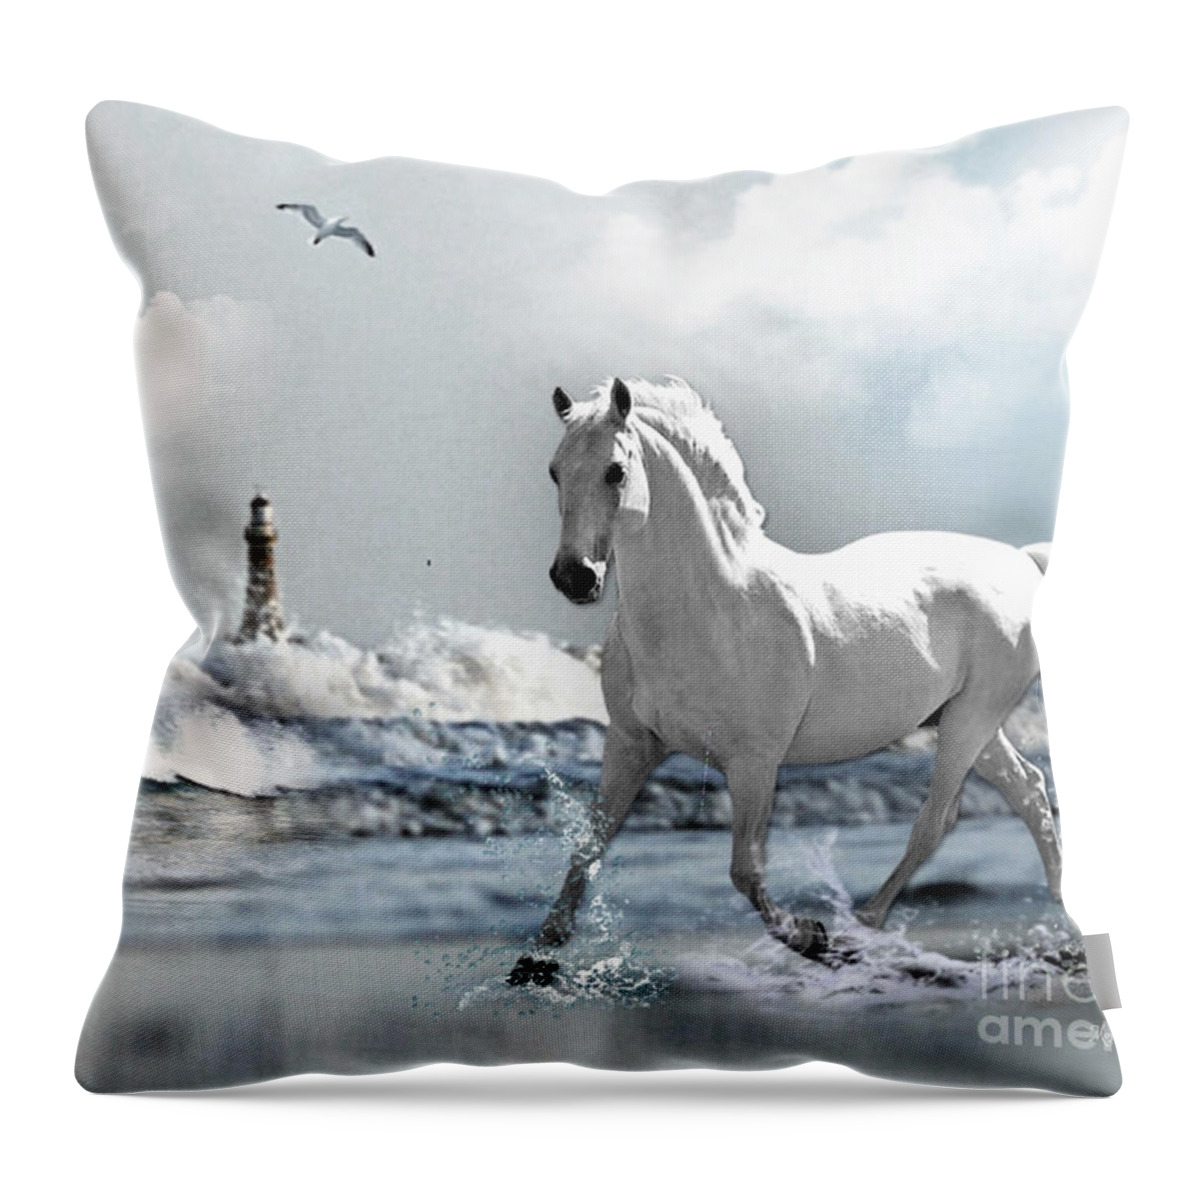 Sunderland Greeting Cards Throw Pillow featuring the mixed media Run Free - Roker Pier Sunderland by Morag Bates